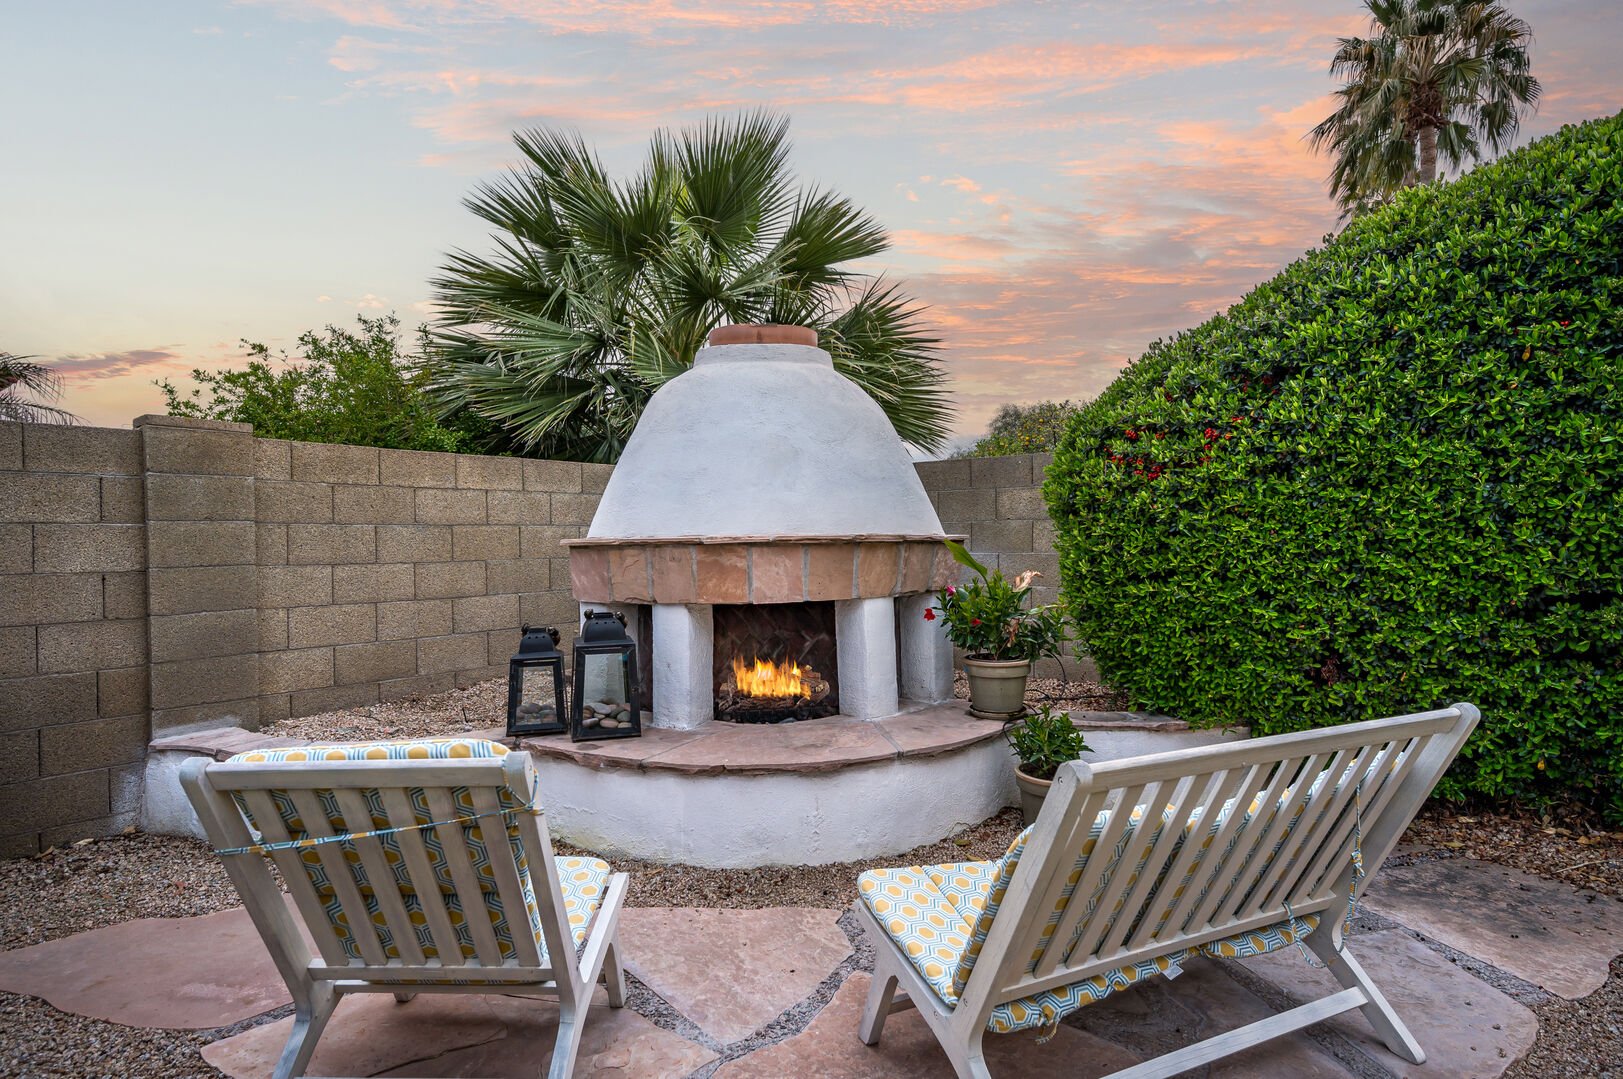 Unwind by the outdoor fireplace.